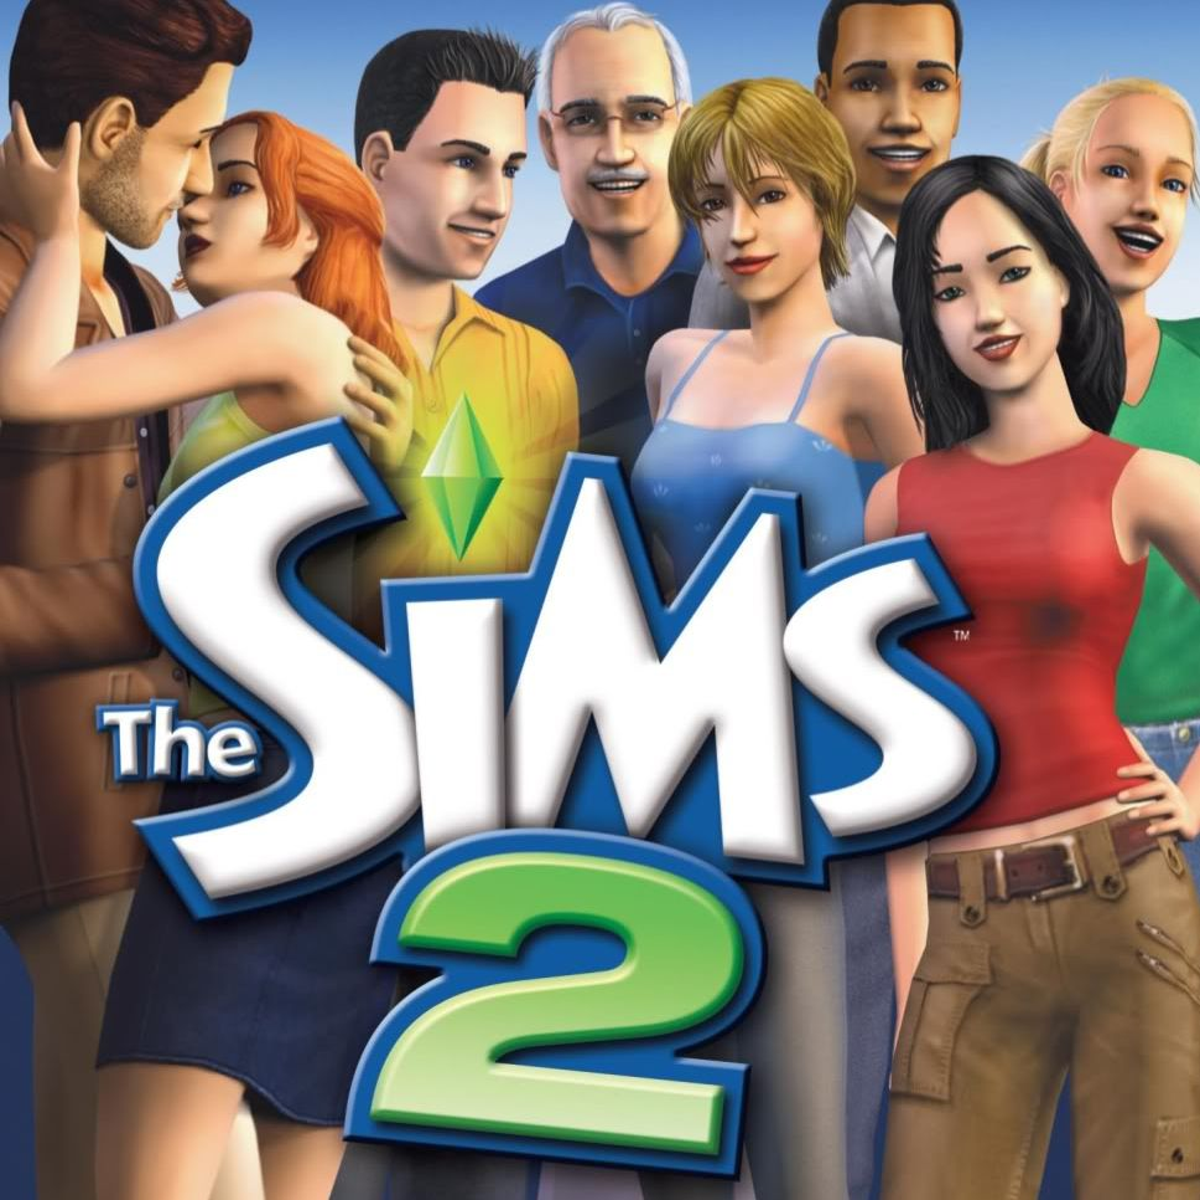 The Sims 2: Improve your gameplay with this simple trick 